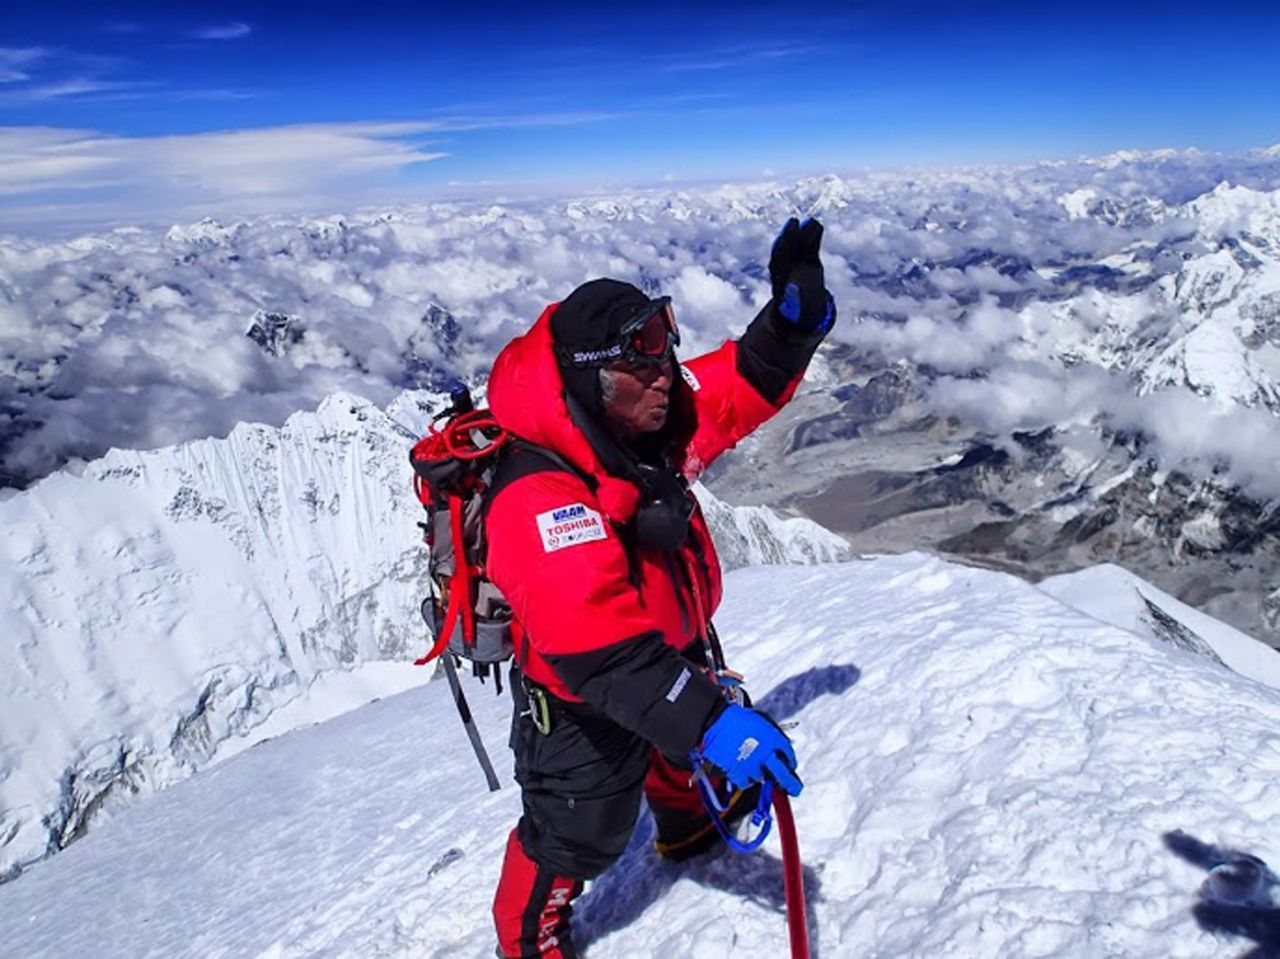 Yuichiro Miura reached the summit of Everest at the age of 80, in May 2013, making him the <a href="http://www.guinnessworldrecords.com/world-records/oldest-person-to-climb-mt-everest-(male)" target="_blank" target="_blank">oldest person</a> to achieve this feat.